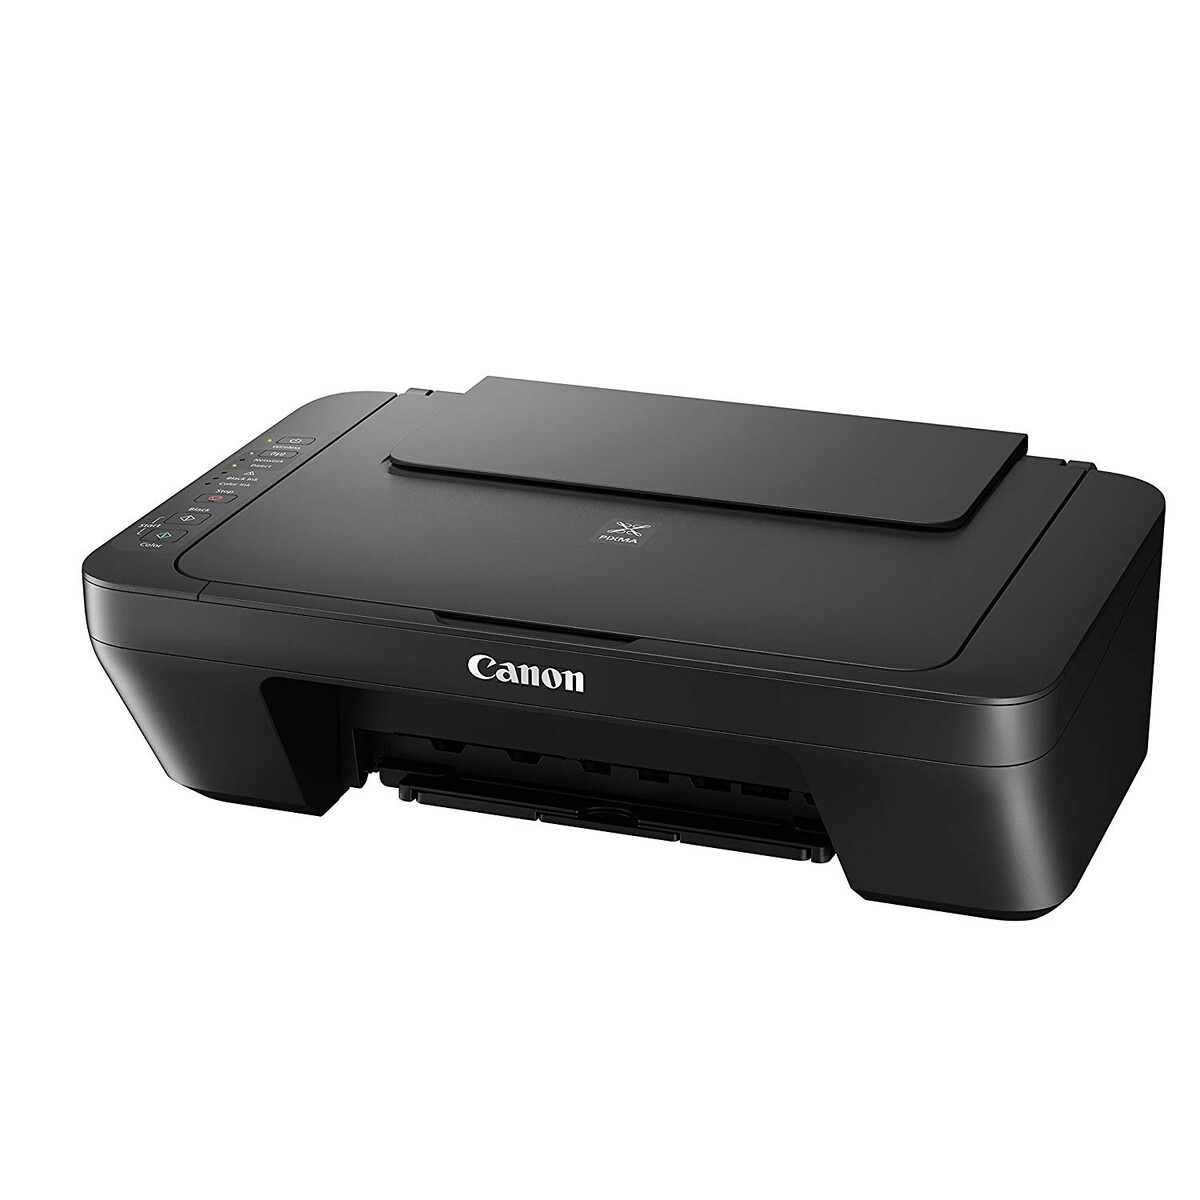 Canon Inkjet All In One Wireless Printer MG3070s